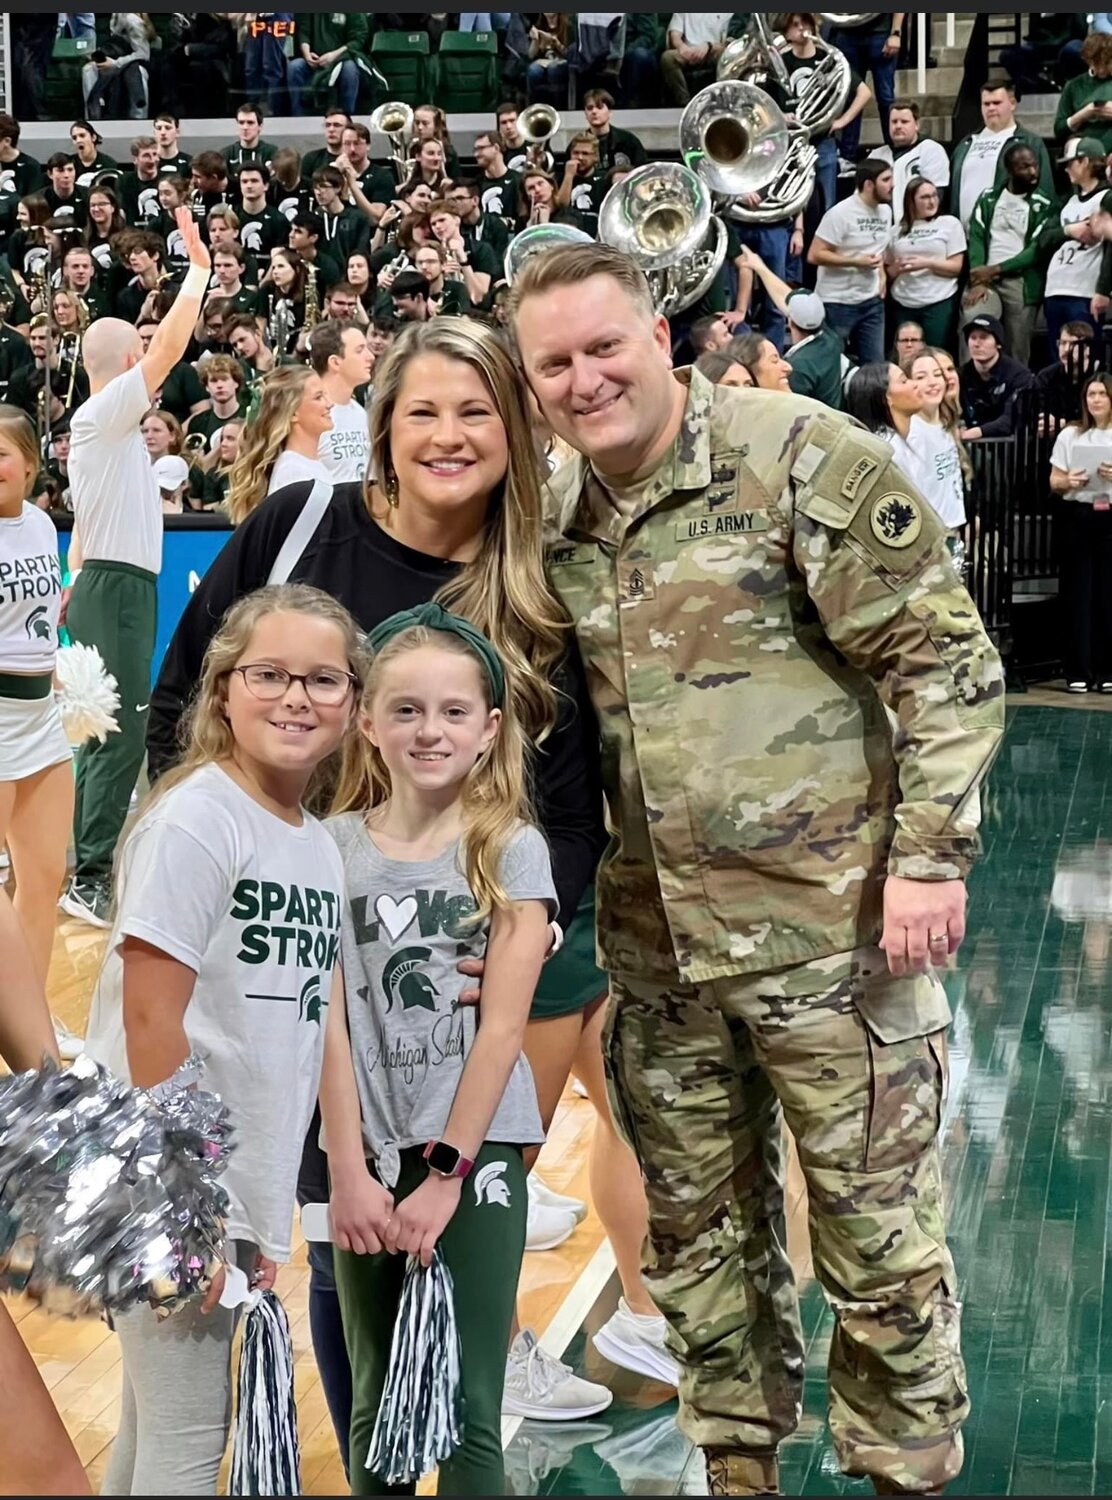 First Sergeant Nick Pence is still active in the Army National Guard but is also involved in the Severna Park community by coaching the sports teams of his daughters, McCall and Brooks. His wife, Lindsey, is an attorney.